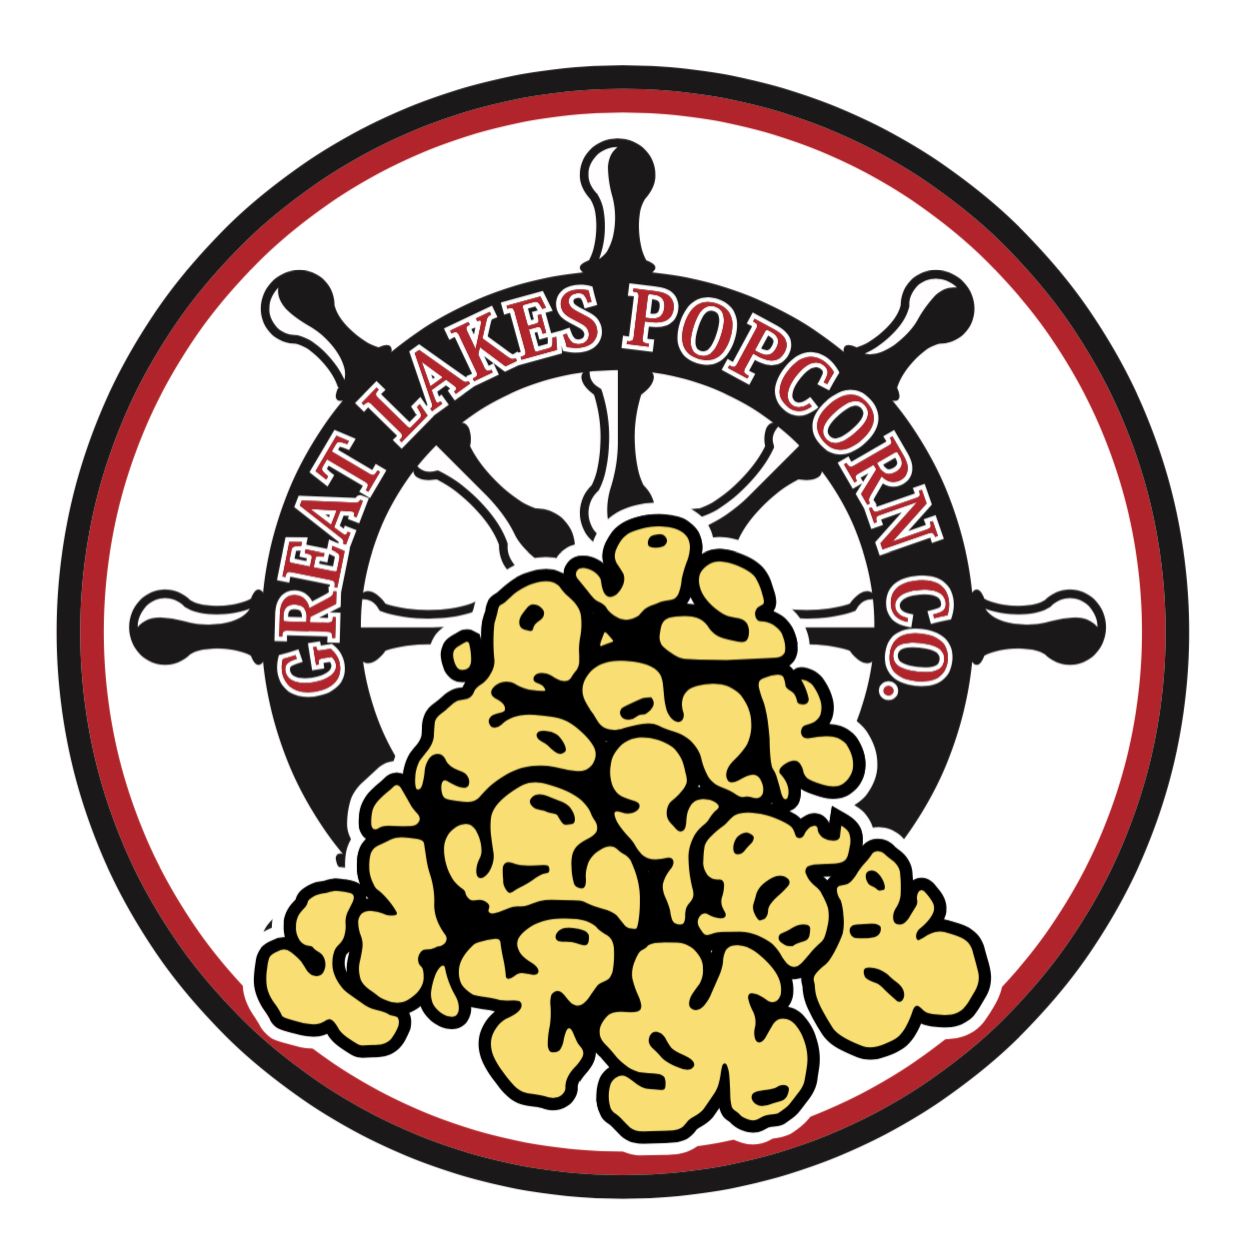 The logo for great lakes popcorn co. has a ship helm and a pile of popcorn in red, black, and yellow.